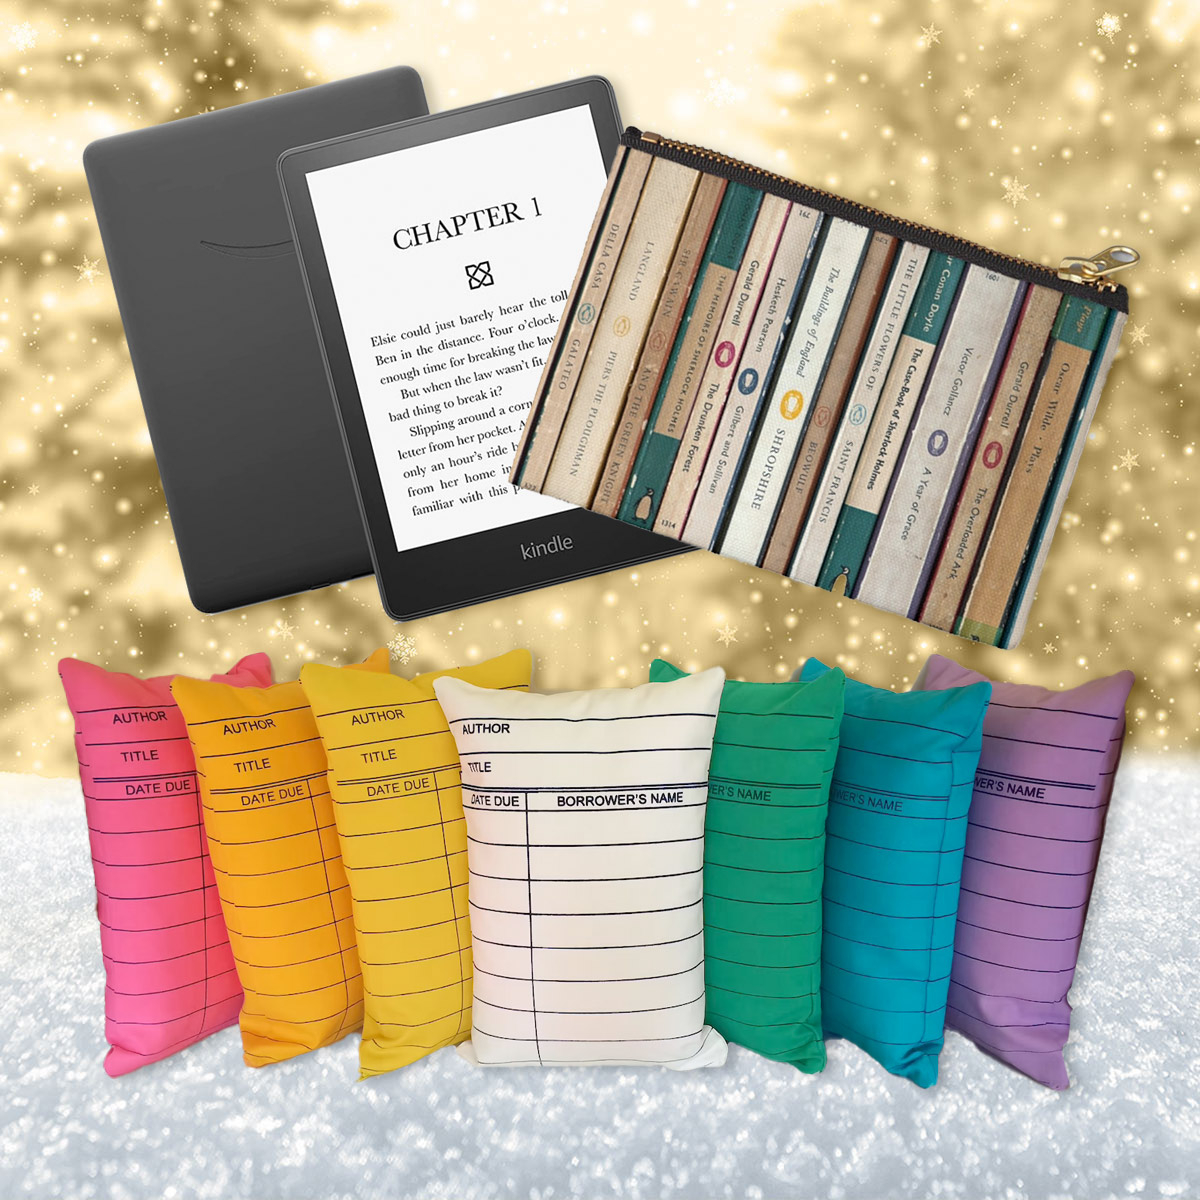 The 15 Best Gifts For Book Lovers this Holiday Season - The Manual